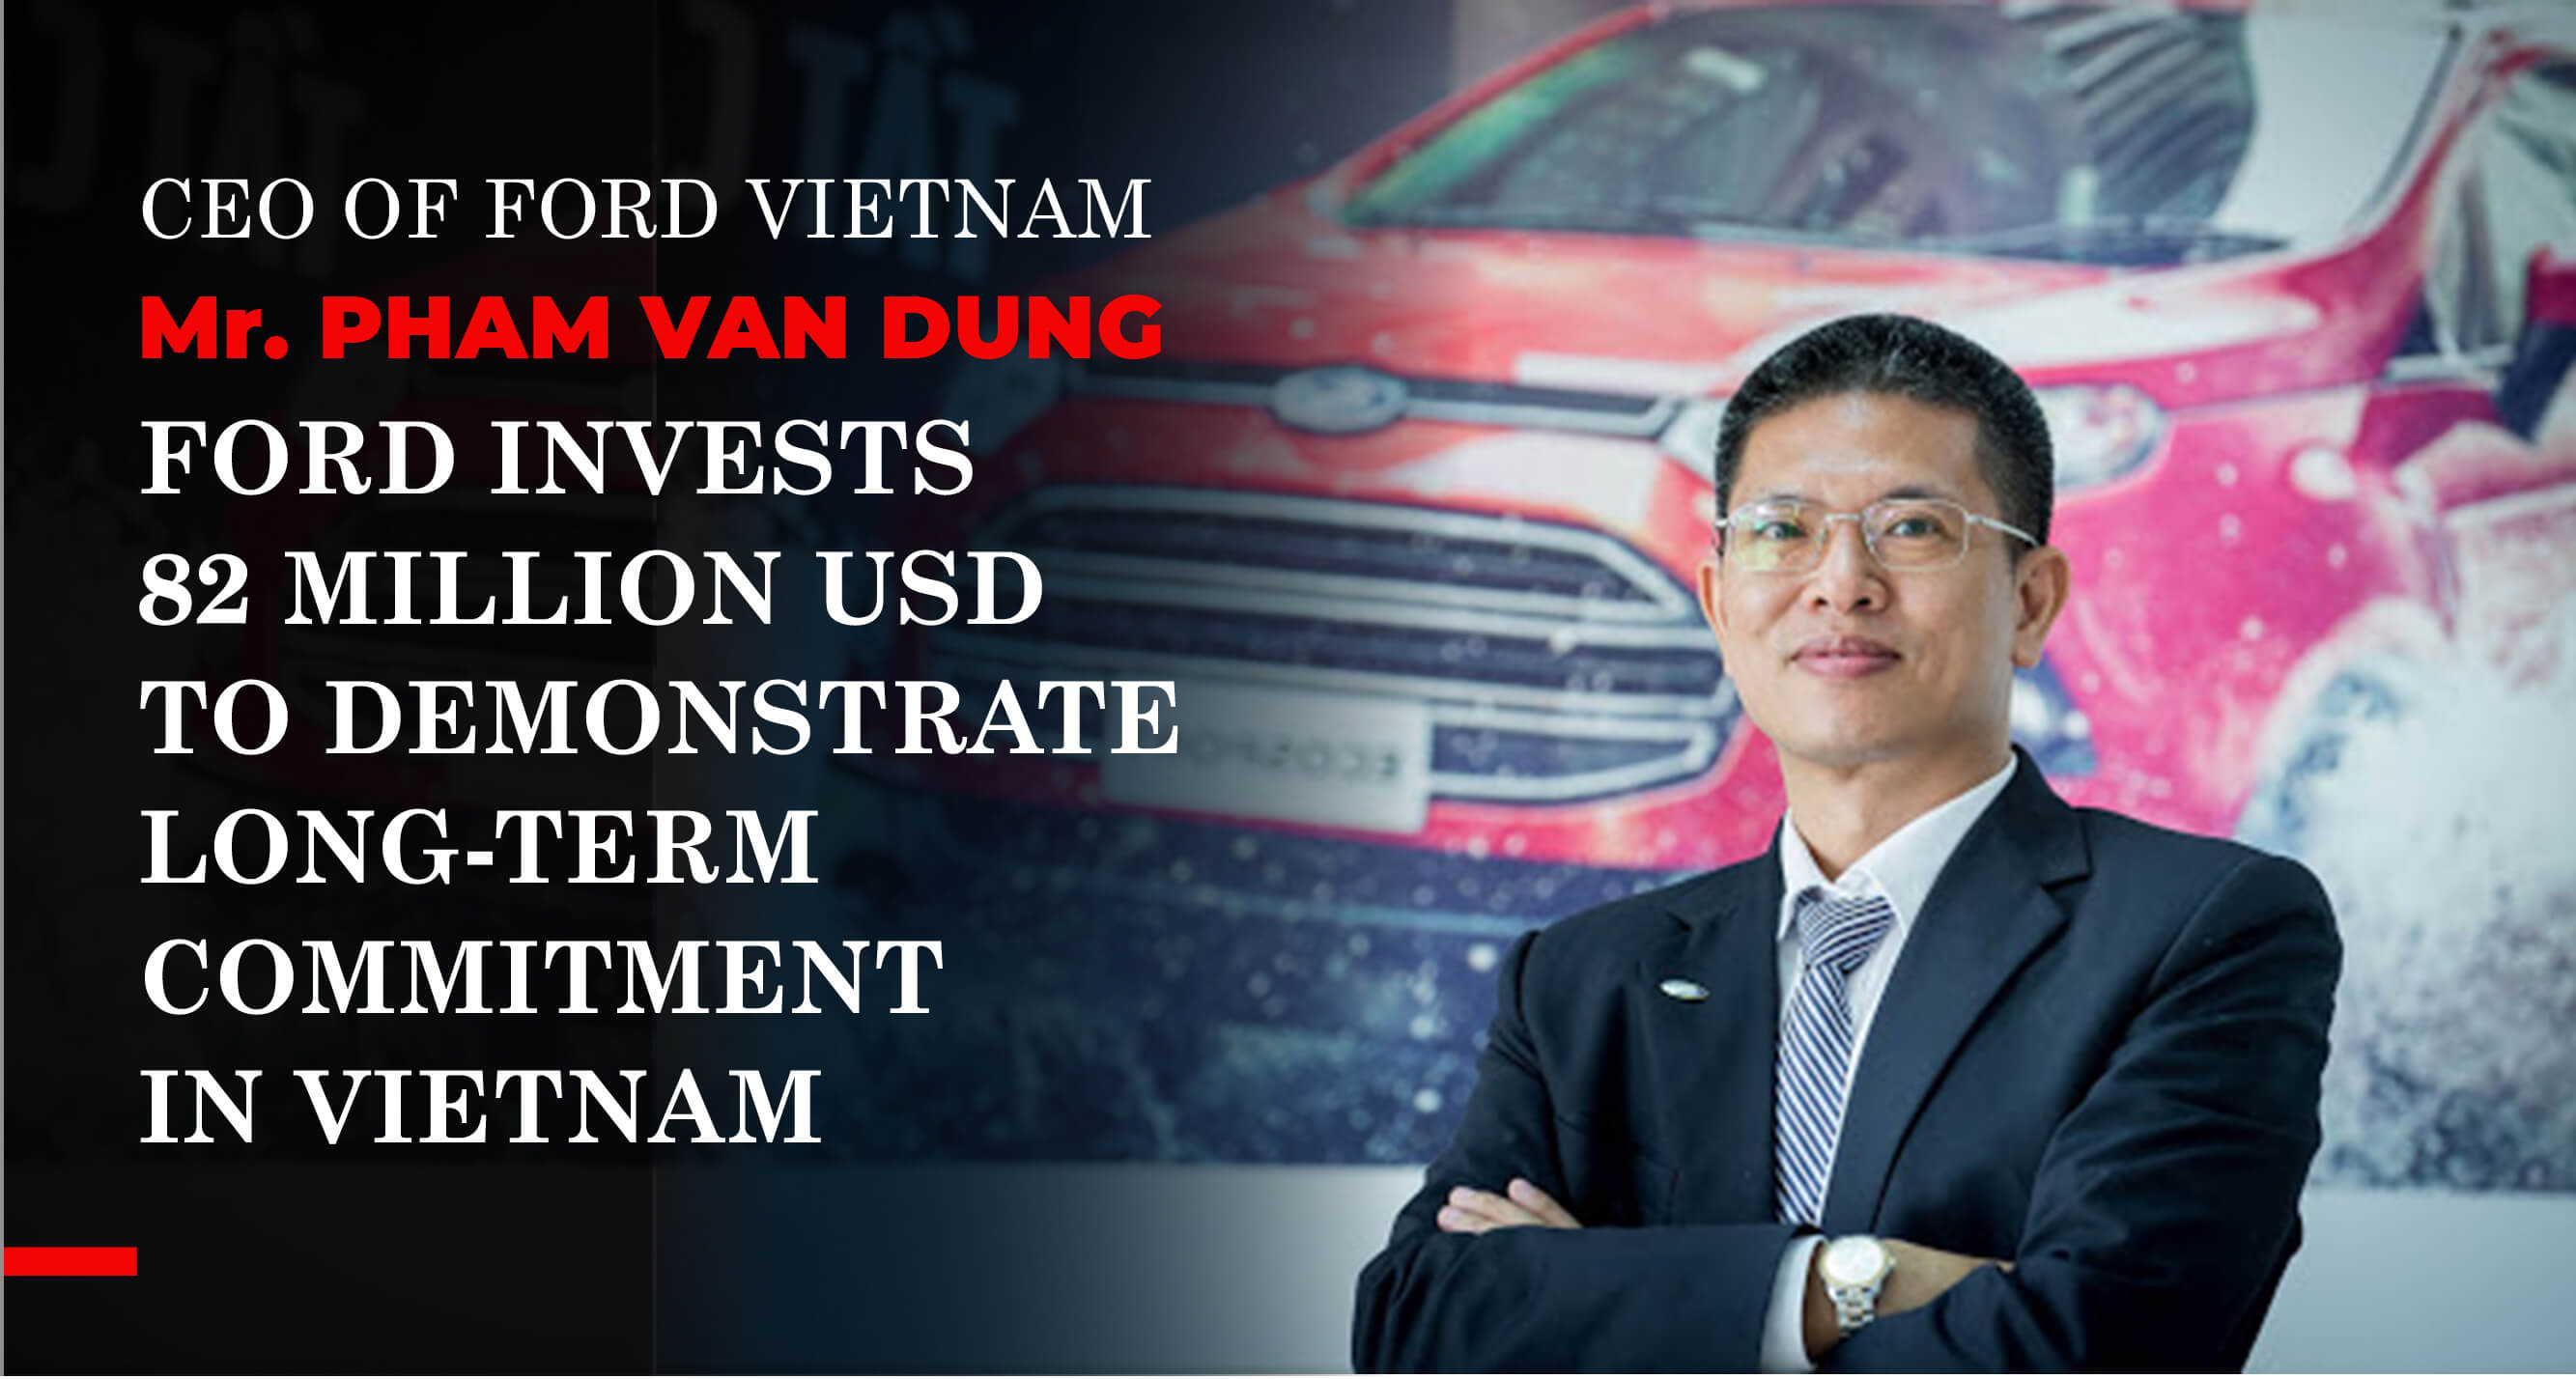 CEO OF FORD VIETNAM Mr. PHAM VAN DUNG – FORD INVESTS 82 MILLION USD TO DEMONSTRATE LONG-TERM COMMITMENT IN VIETNAM